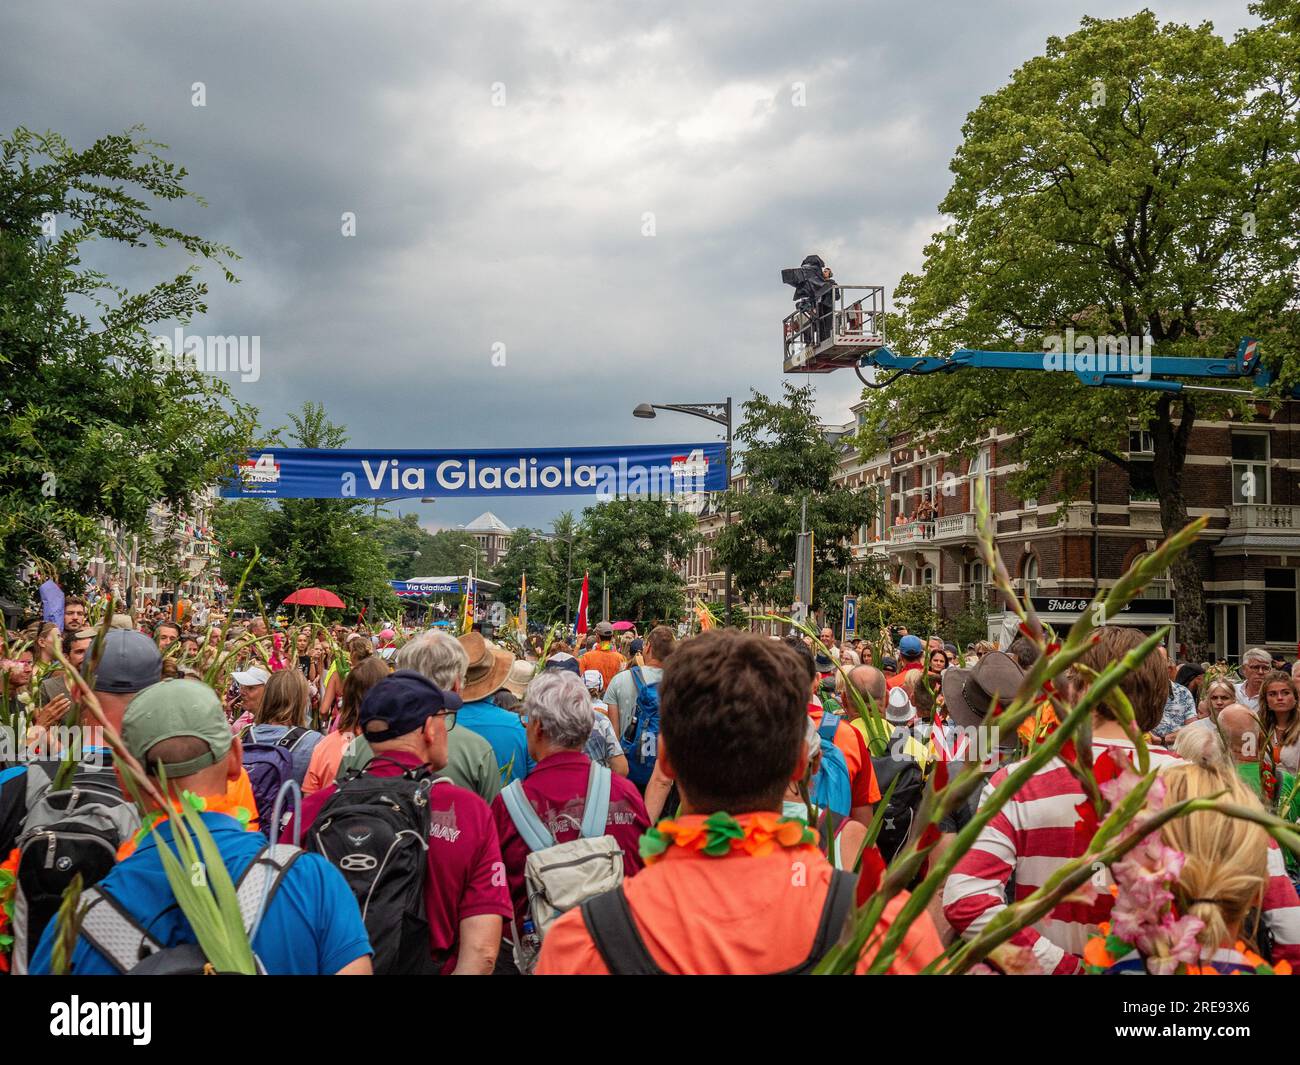 July 21, 2023, Nijmegen, Netherlands: Walkers are seen arriving at the street called for this event ''Via Gladiola''. Since it is the worldâ€™s biggest multi-day walking event, The International Four Days Marches (in Dutch 'De Vierdaagse') is seen as the prime example of sportsmanship and international bonding between military servicemen, women and civilians from many different countries. This year, it was the 105 edition and the official amount of walkers registered was 43,363 from 77 countries. Participants can choose to walk 30km, 40km, or 50km per day. On the last day, 39,019 walkers cross Stock Photo